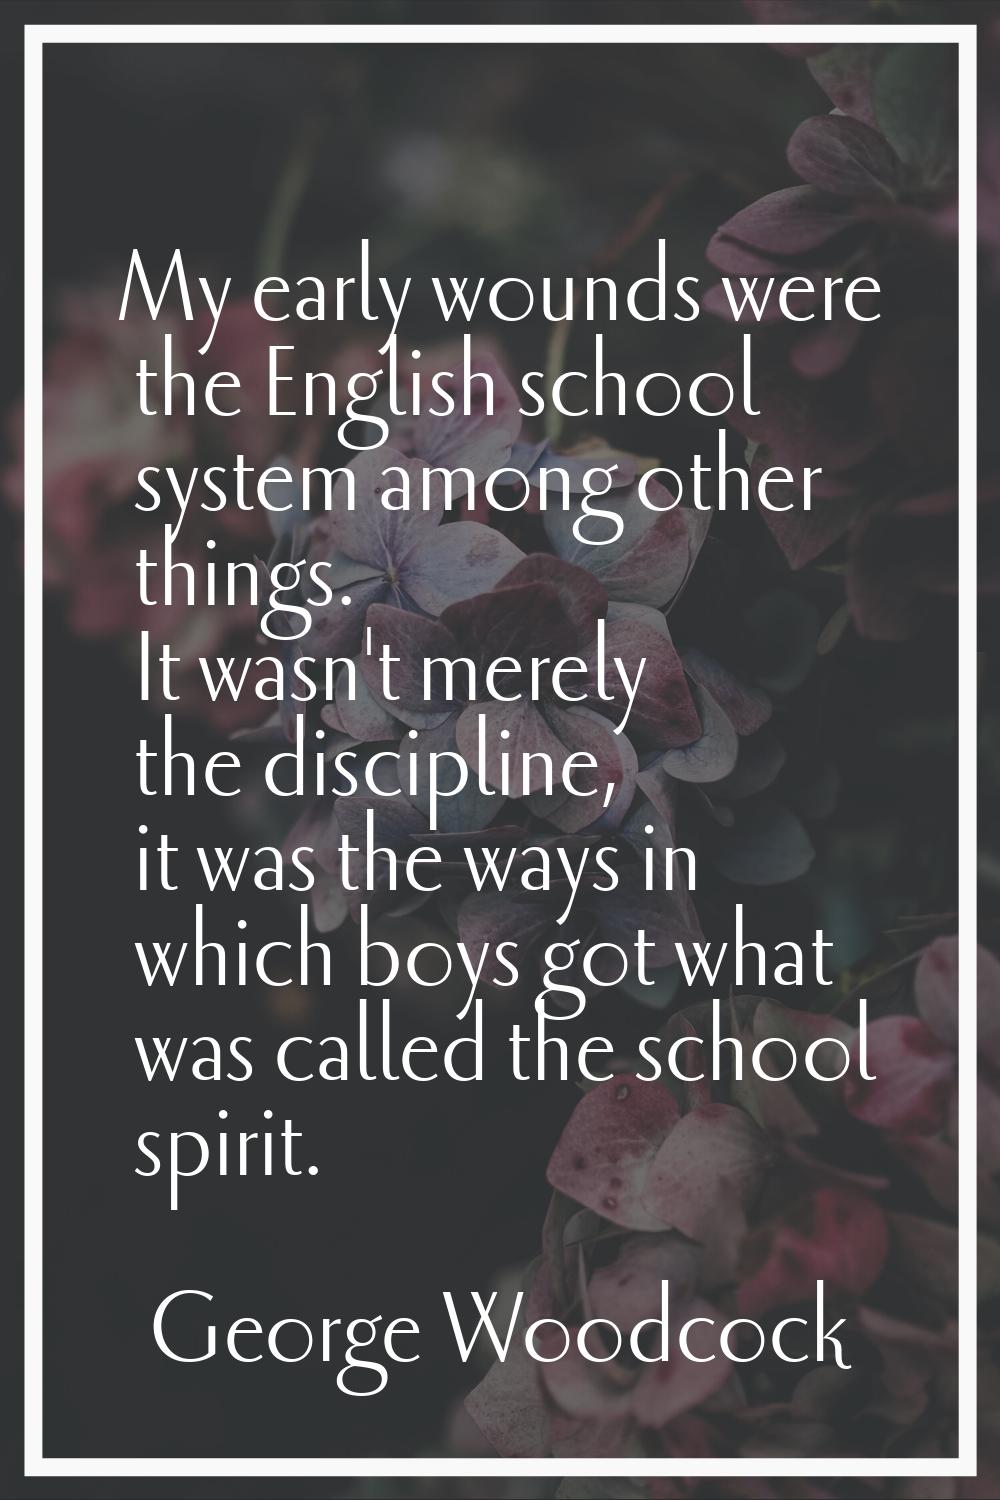 My early wounds were the English school system among other things. It wasn't merely the discipline,